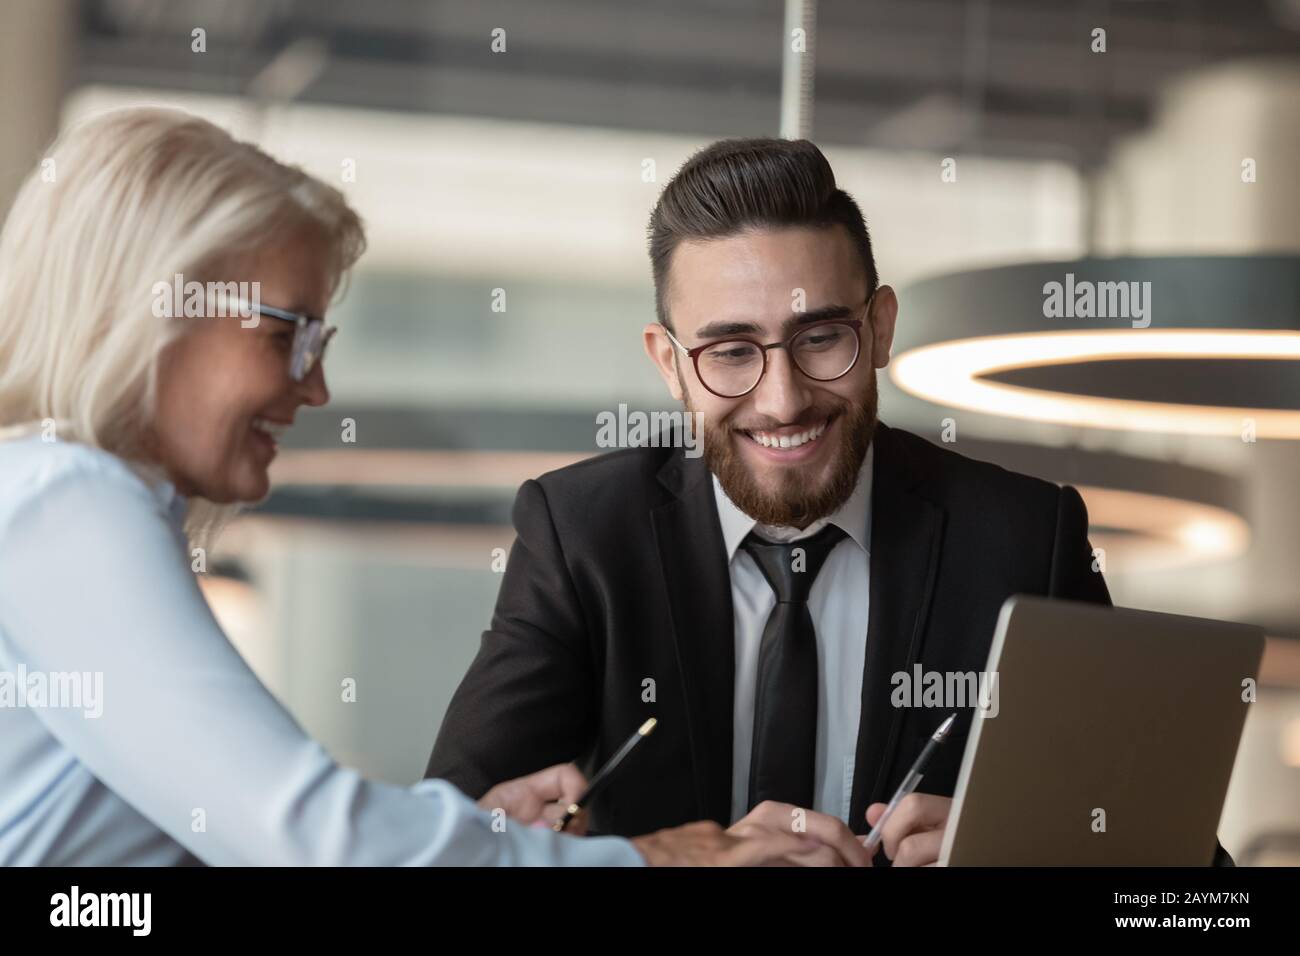 European manager consulting arabian client using computer process provide information Stock Photo